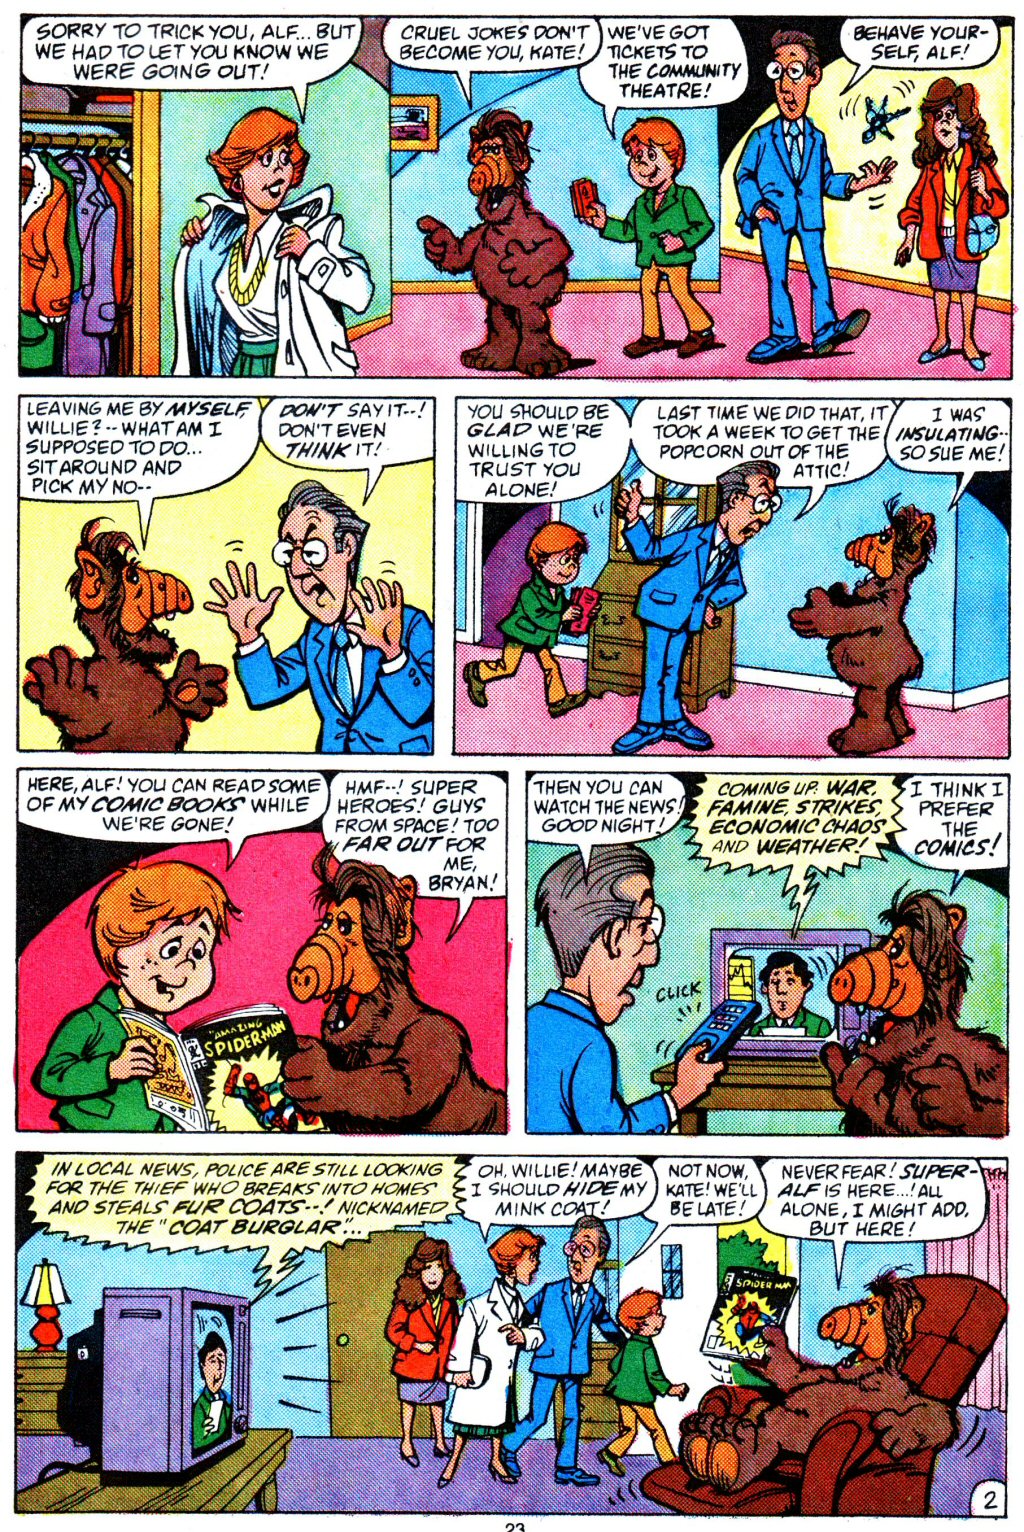 Read online ALF comic -  Issue #4 - 18